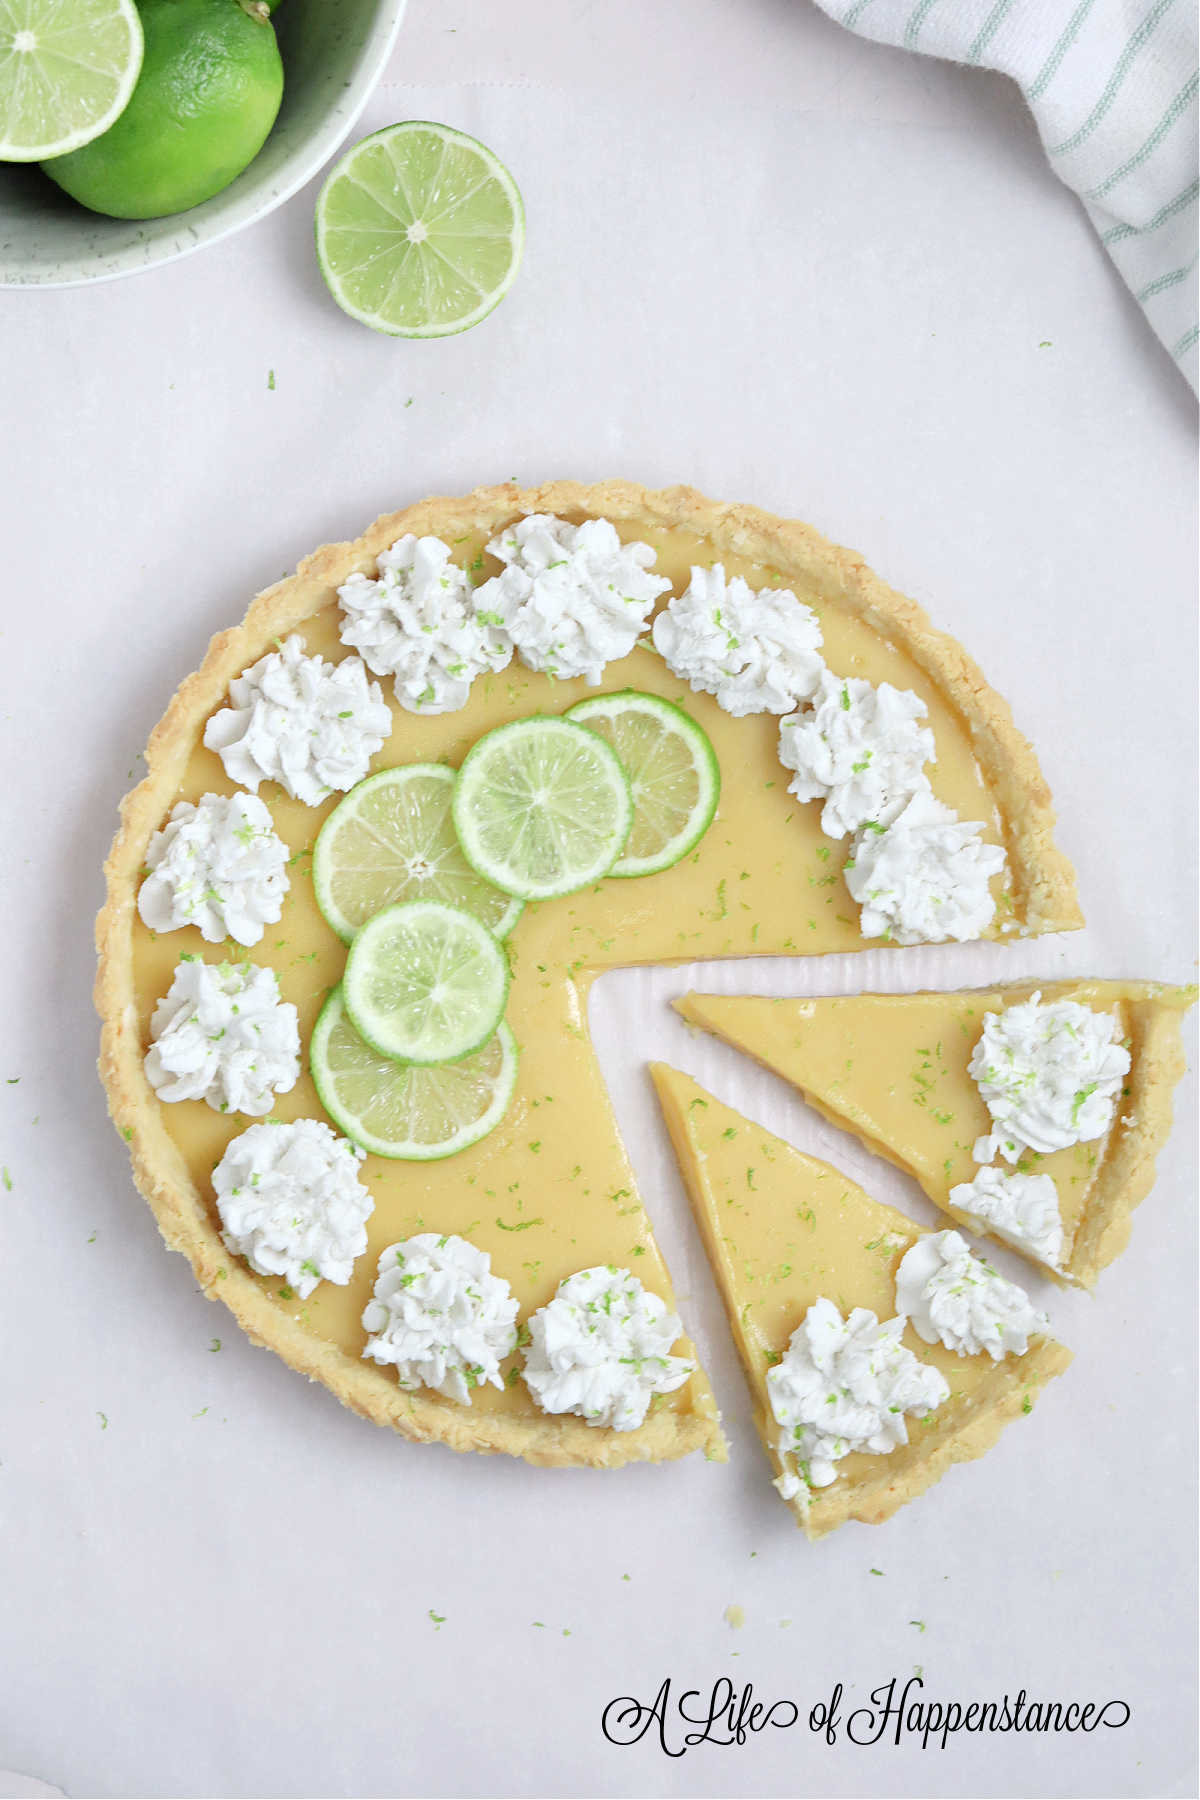 A coconut lime tart on a table with two slices cut from it.